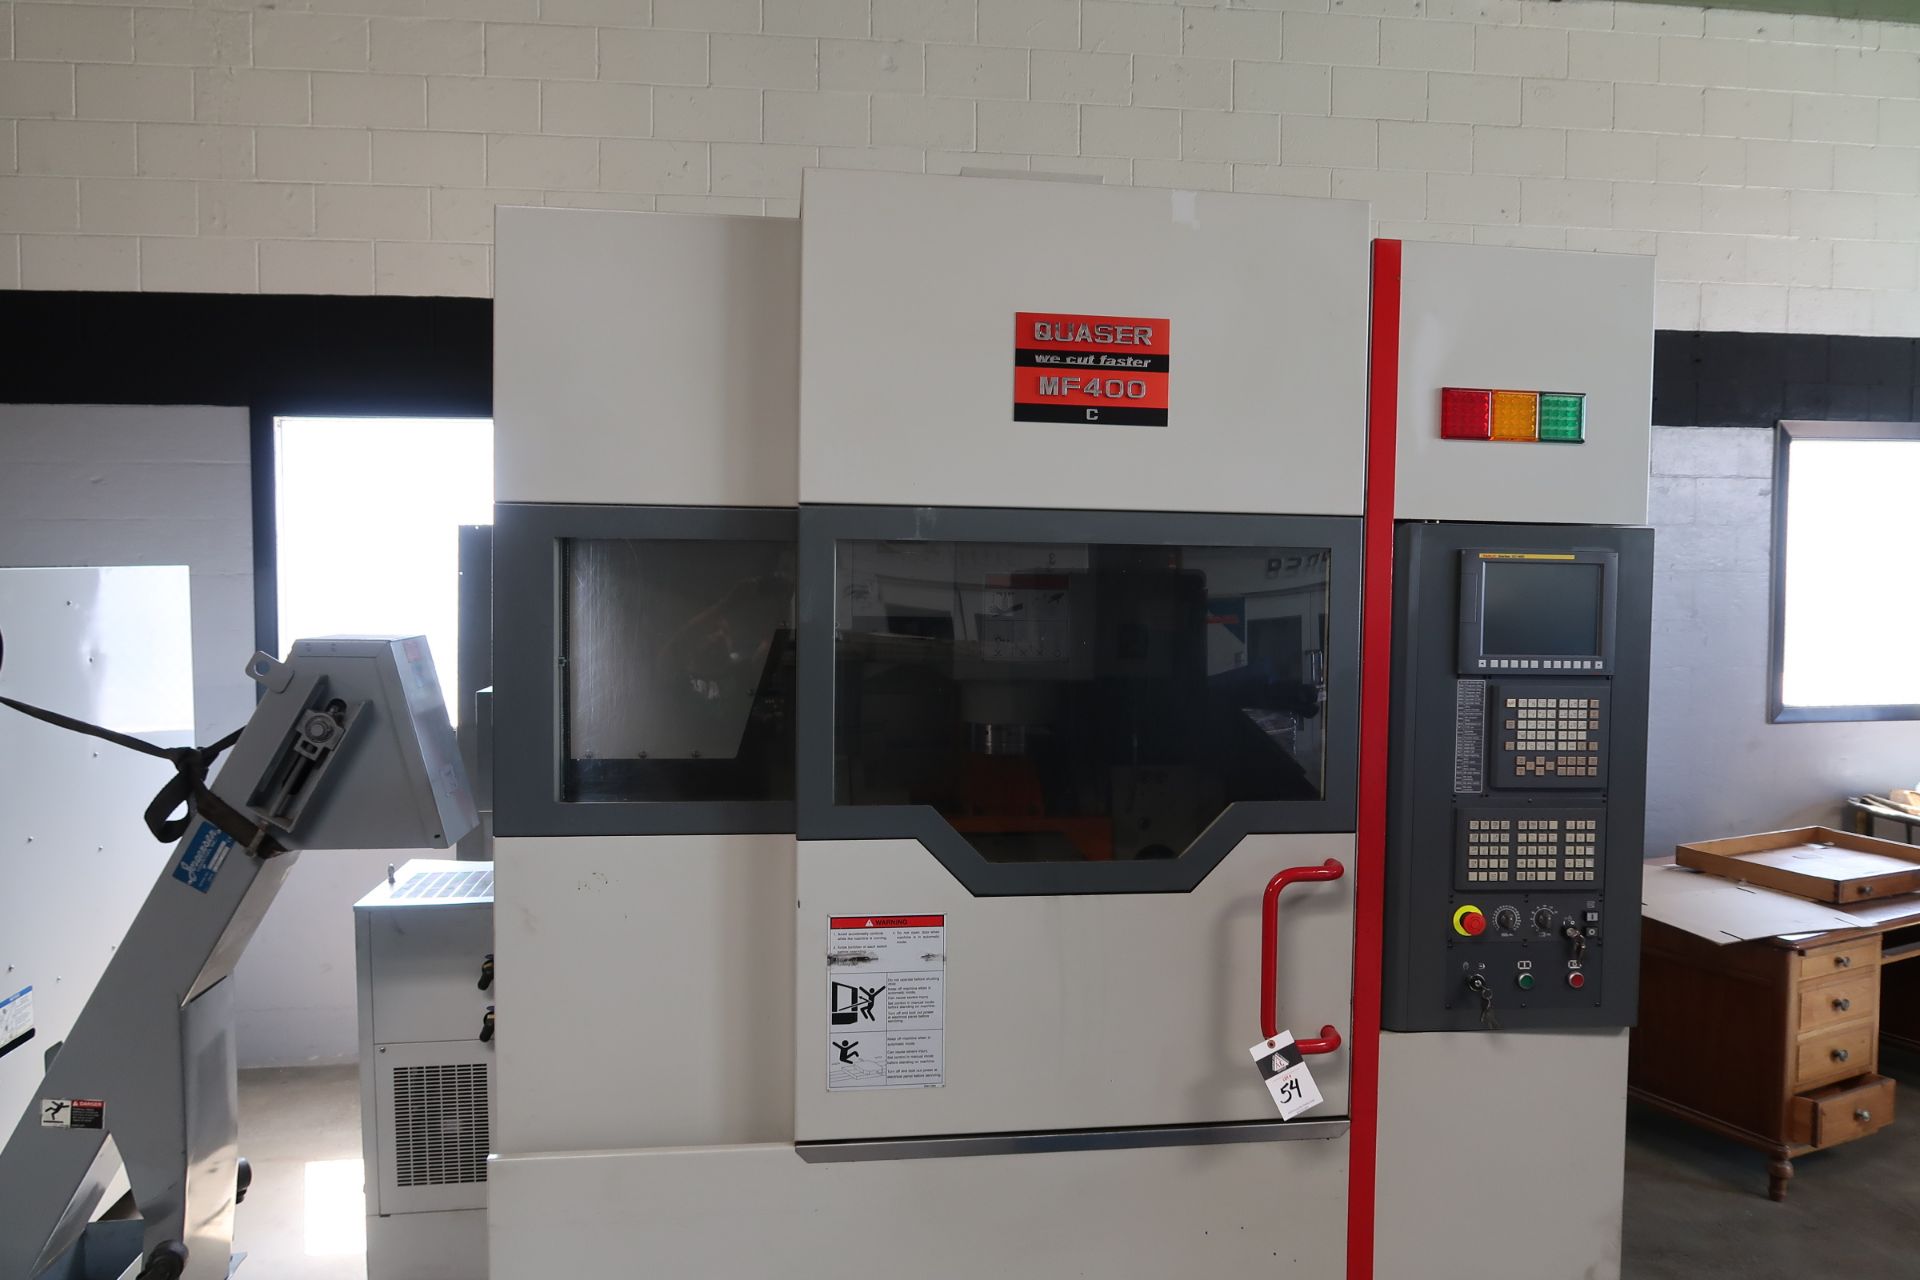 2011 Quaser MF400C/10C 5-Axis CNC Machining Center s/n 306B110041 w/ Fanuc Series 0i-MD, SOLD AS IS - Image 2 of 16